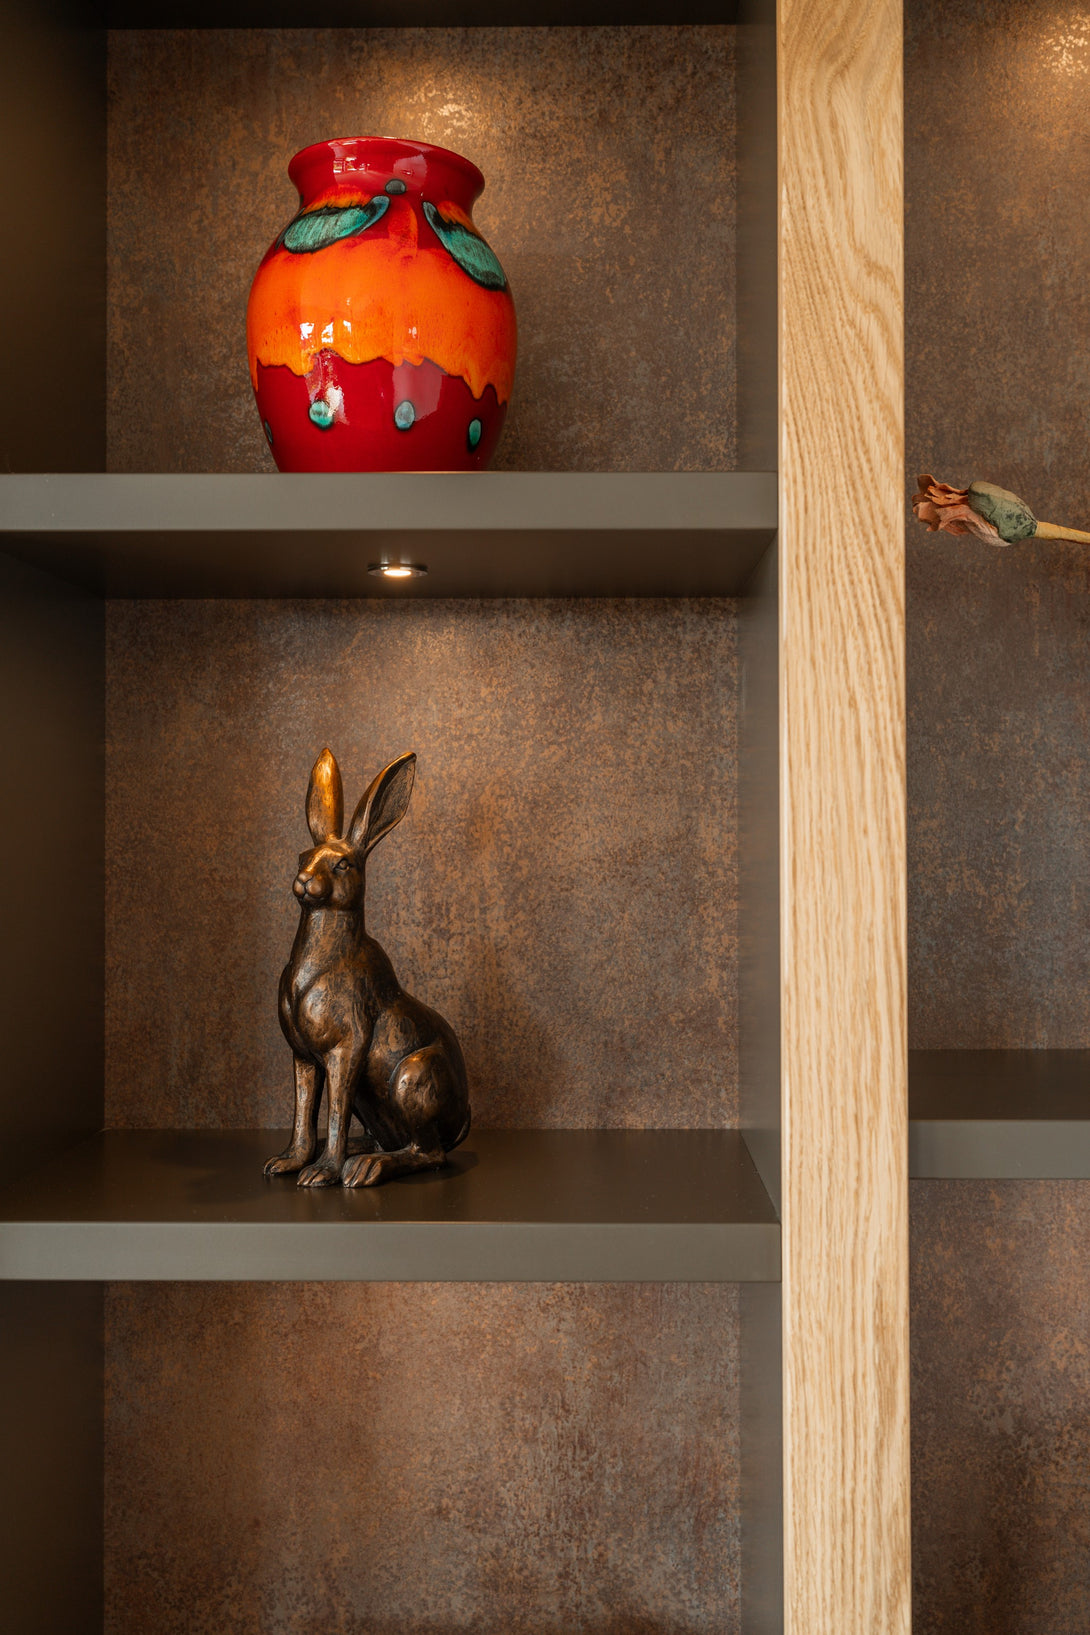 Bespoke Lounge Media Wall - Ornament and Decorations on Shelves